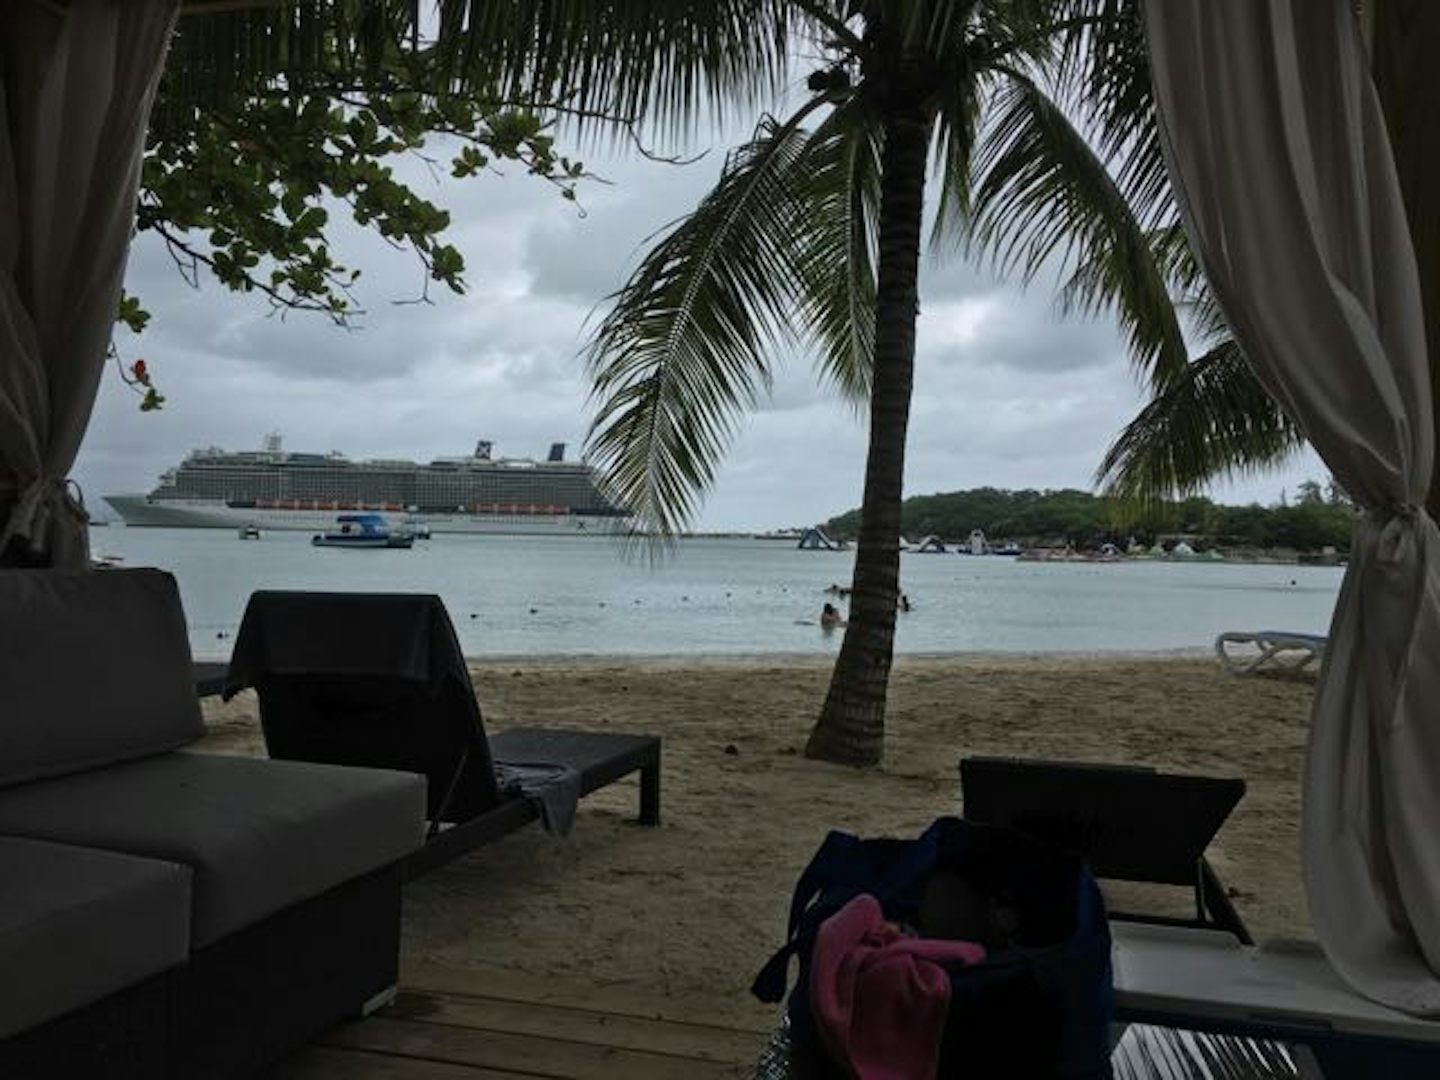 View from Beach Bungalow 6 at Labadee.  It was a cloudy and rather blustery